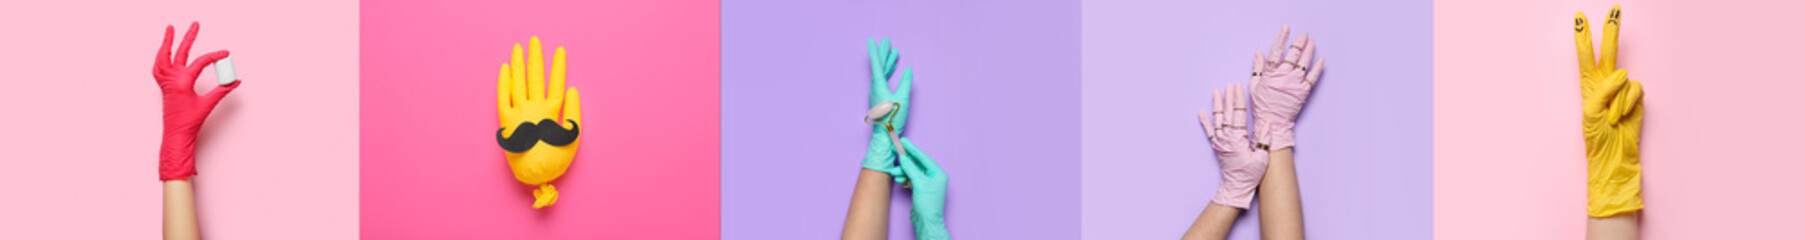 Woman in rubber glove with marshmallow on pink background